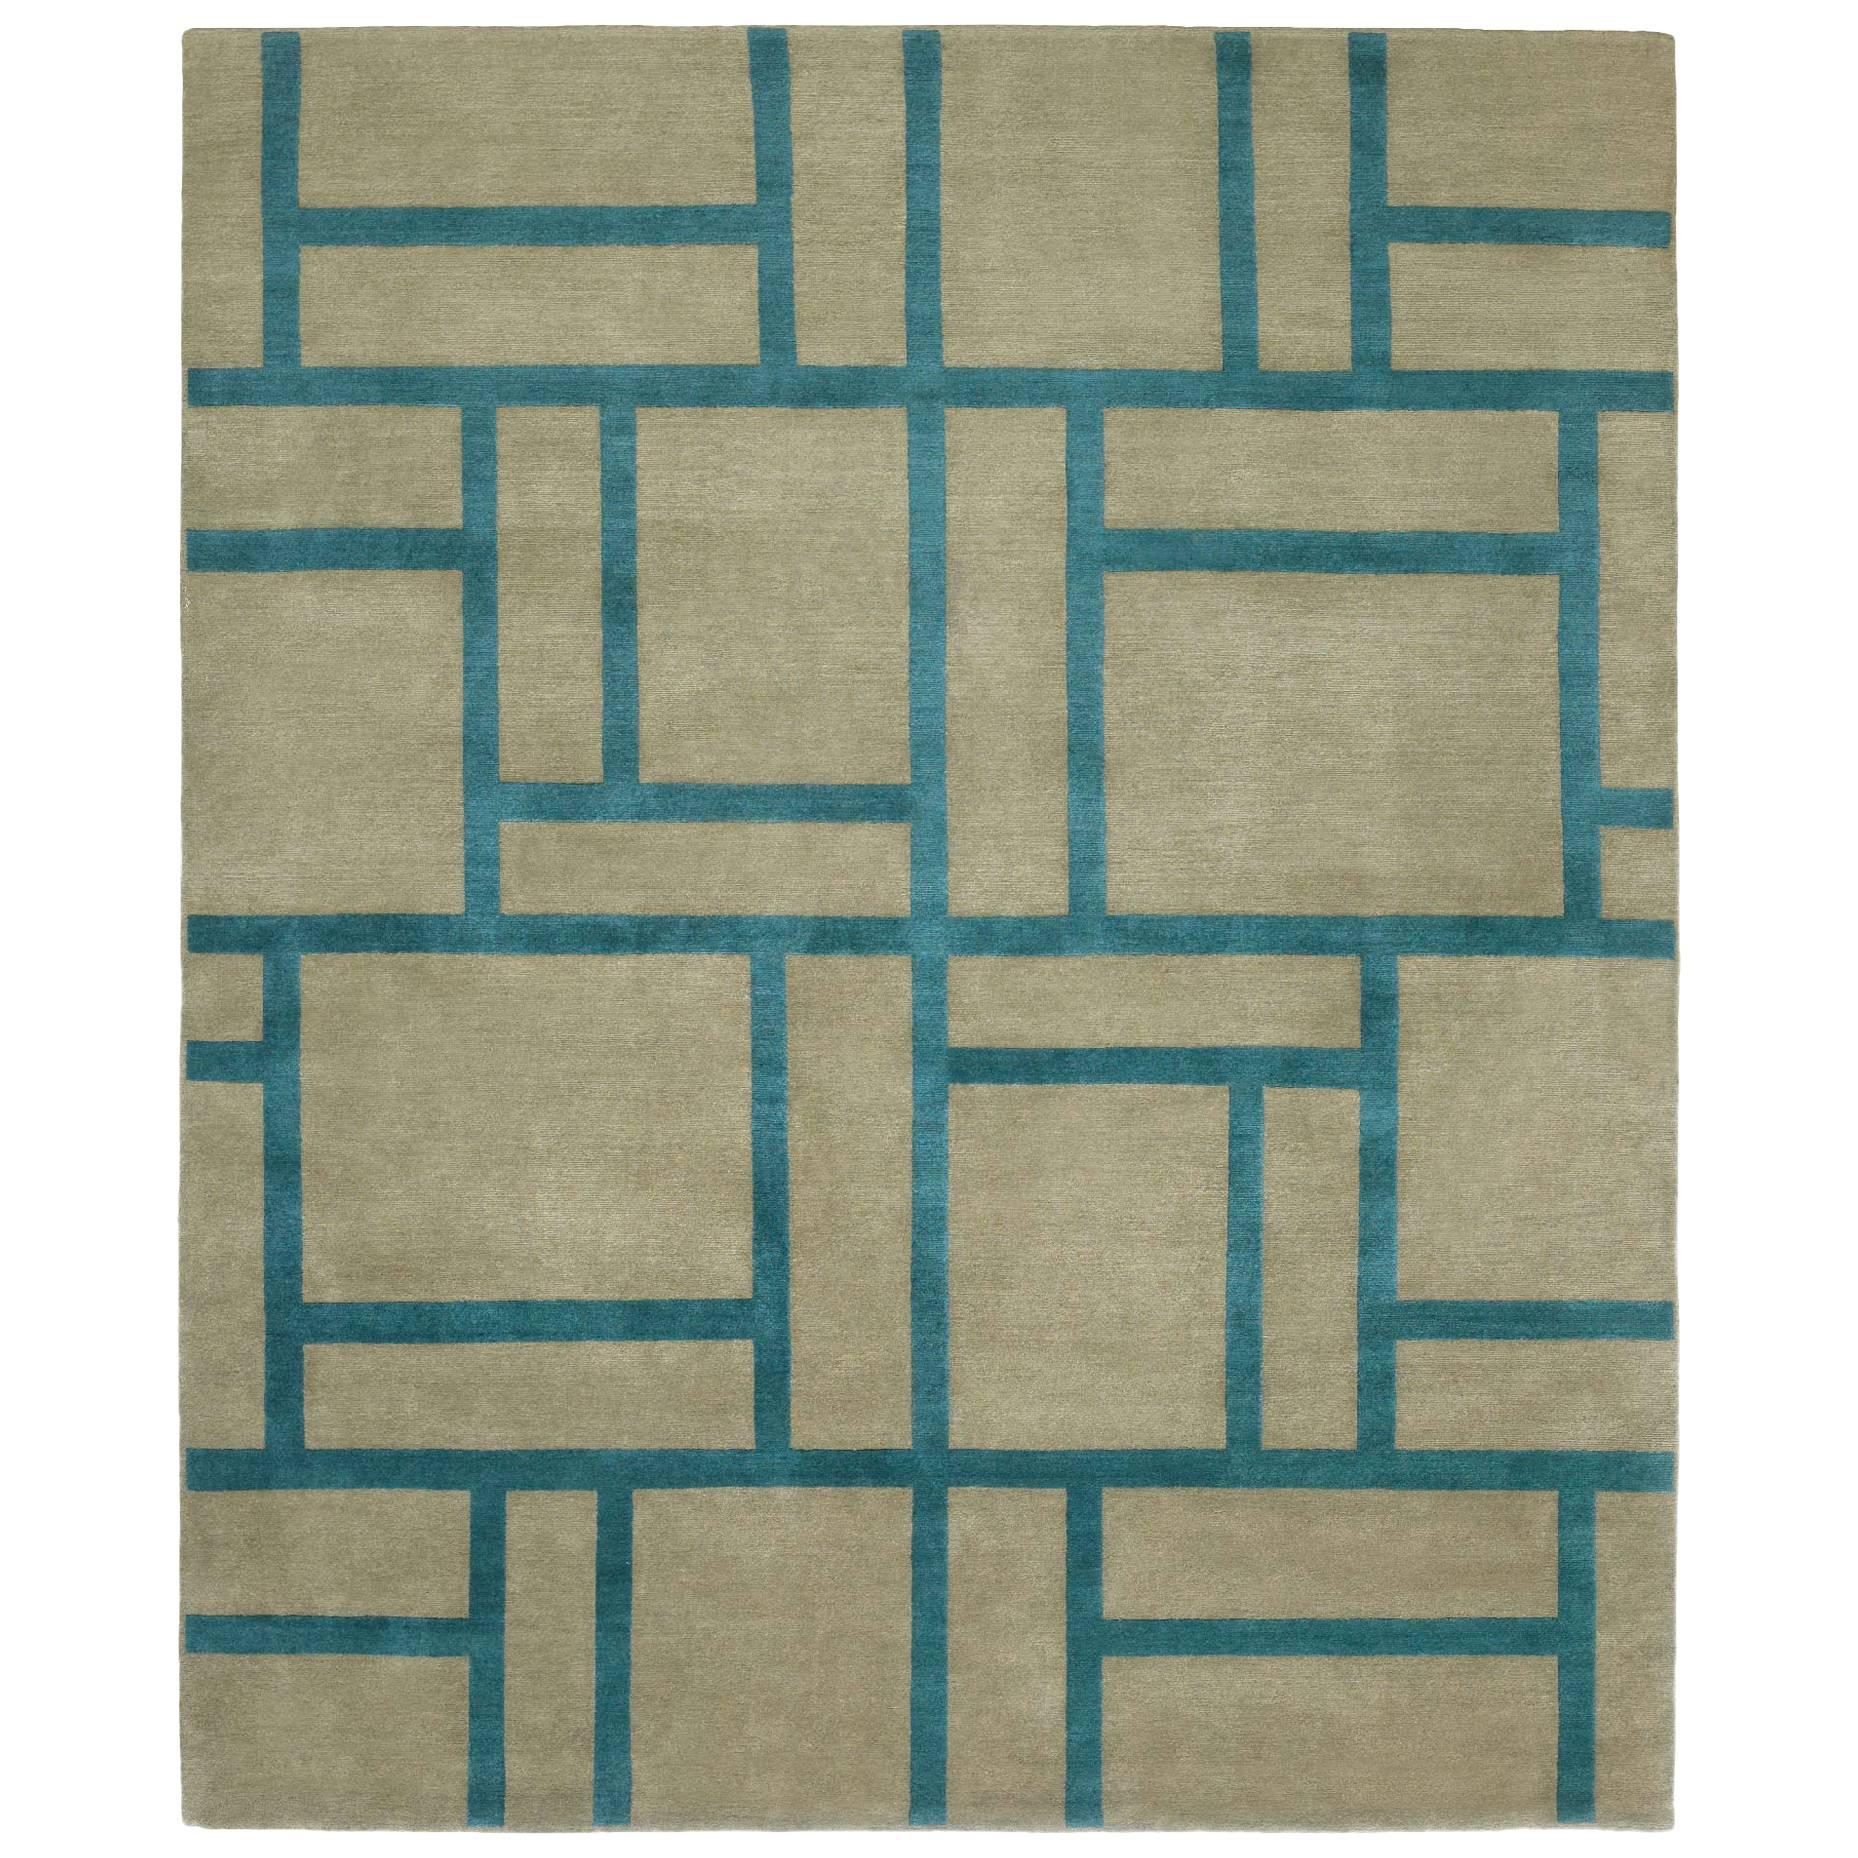 Contemporary Tibetan Rug Hand-Knotted in Nepal, Turquoise - Green Brown For Sale